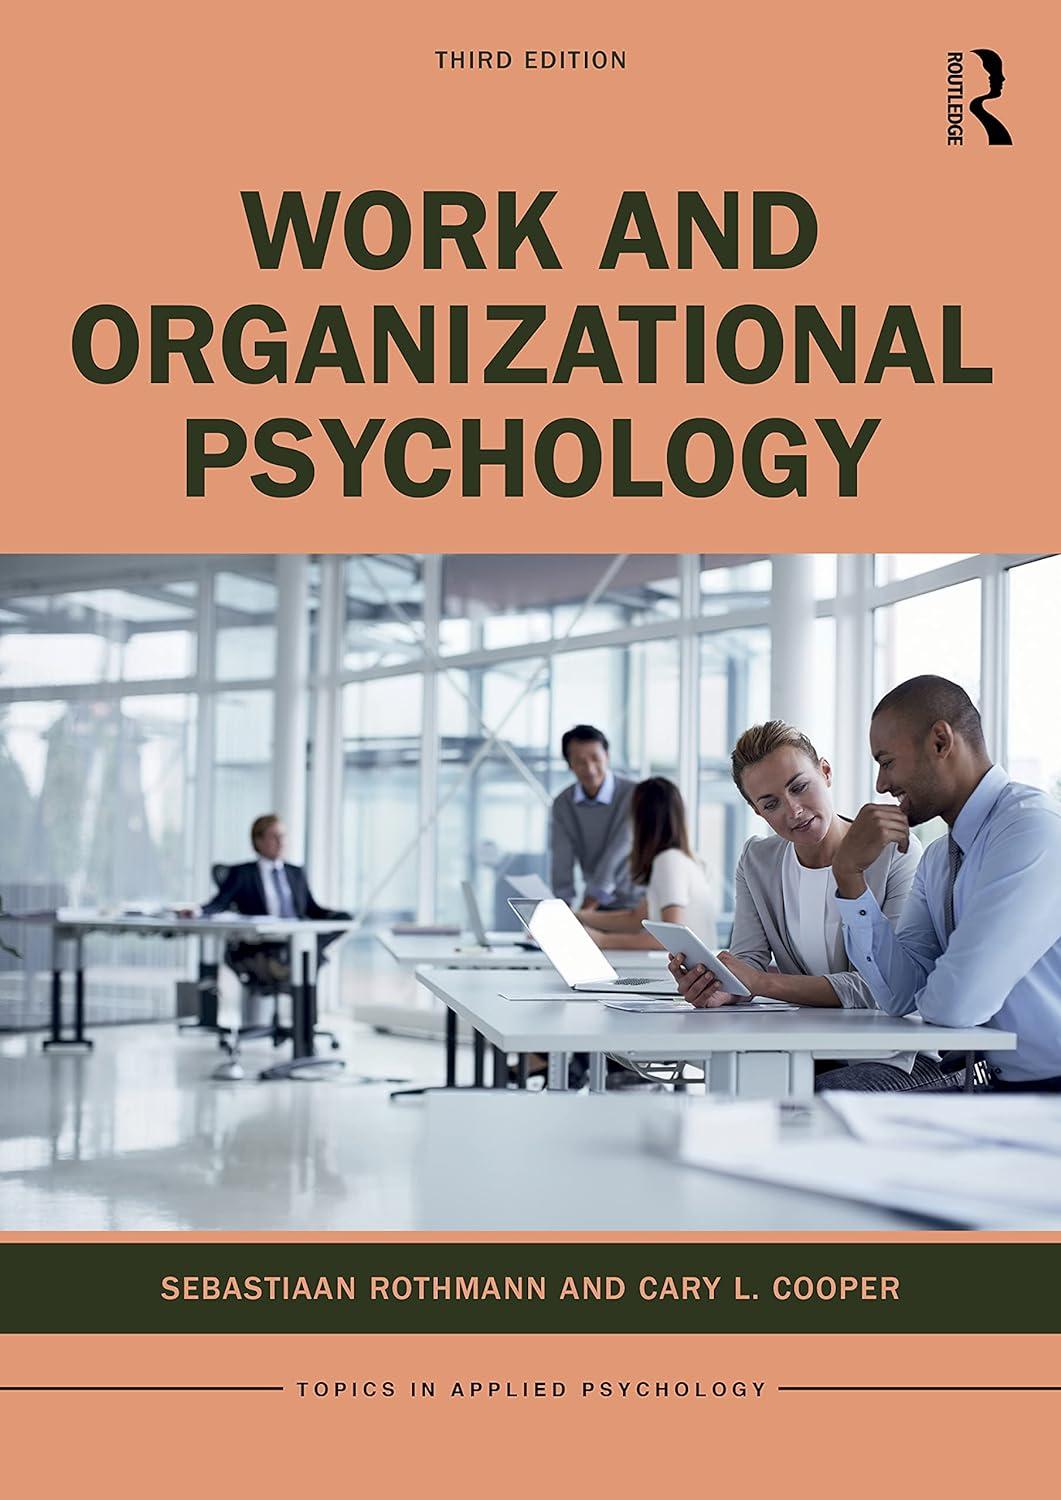 work and organizational psychology topics in applied psychology 3rd edition sebastiaan rothmann, cary l.